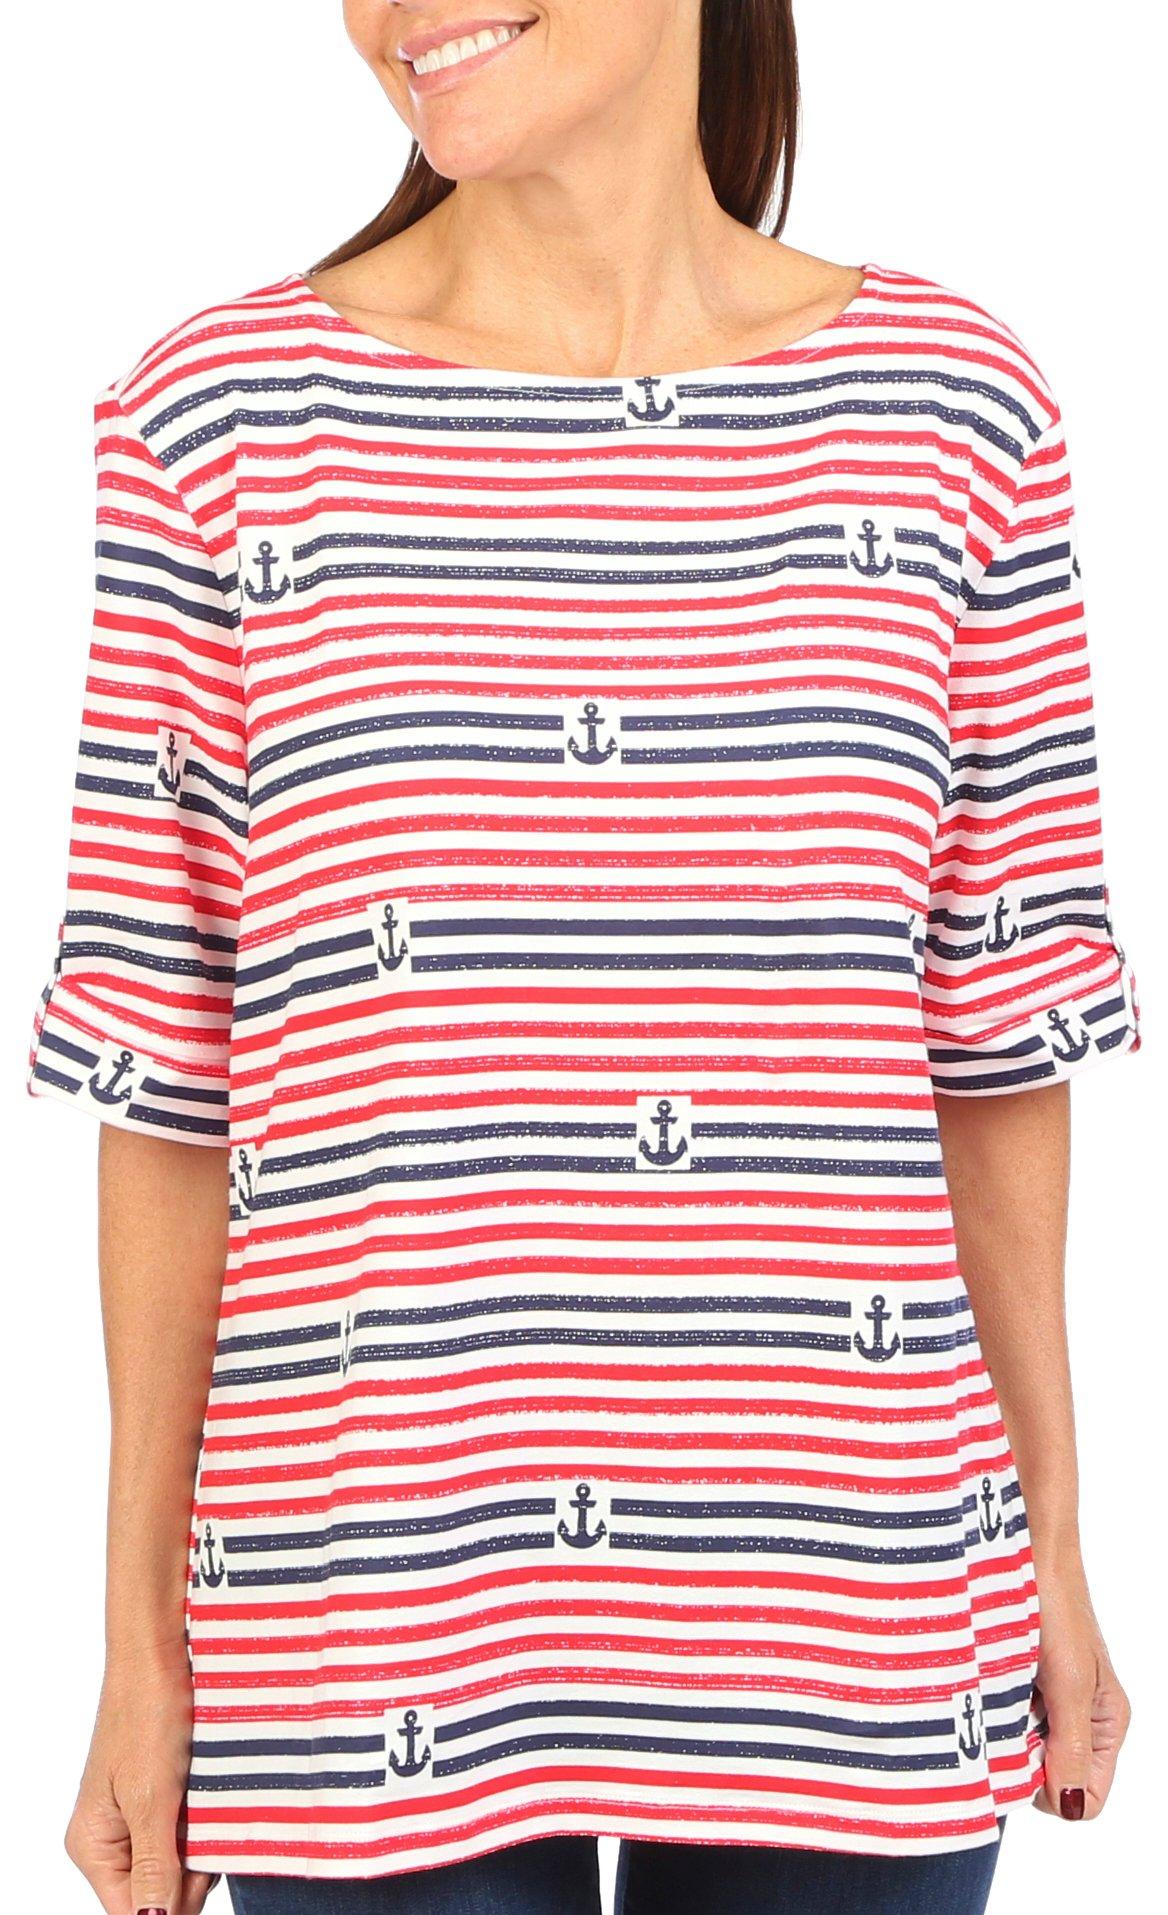 Coral Bay Petite Striped Anchor Print Short Sleeve